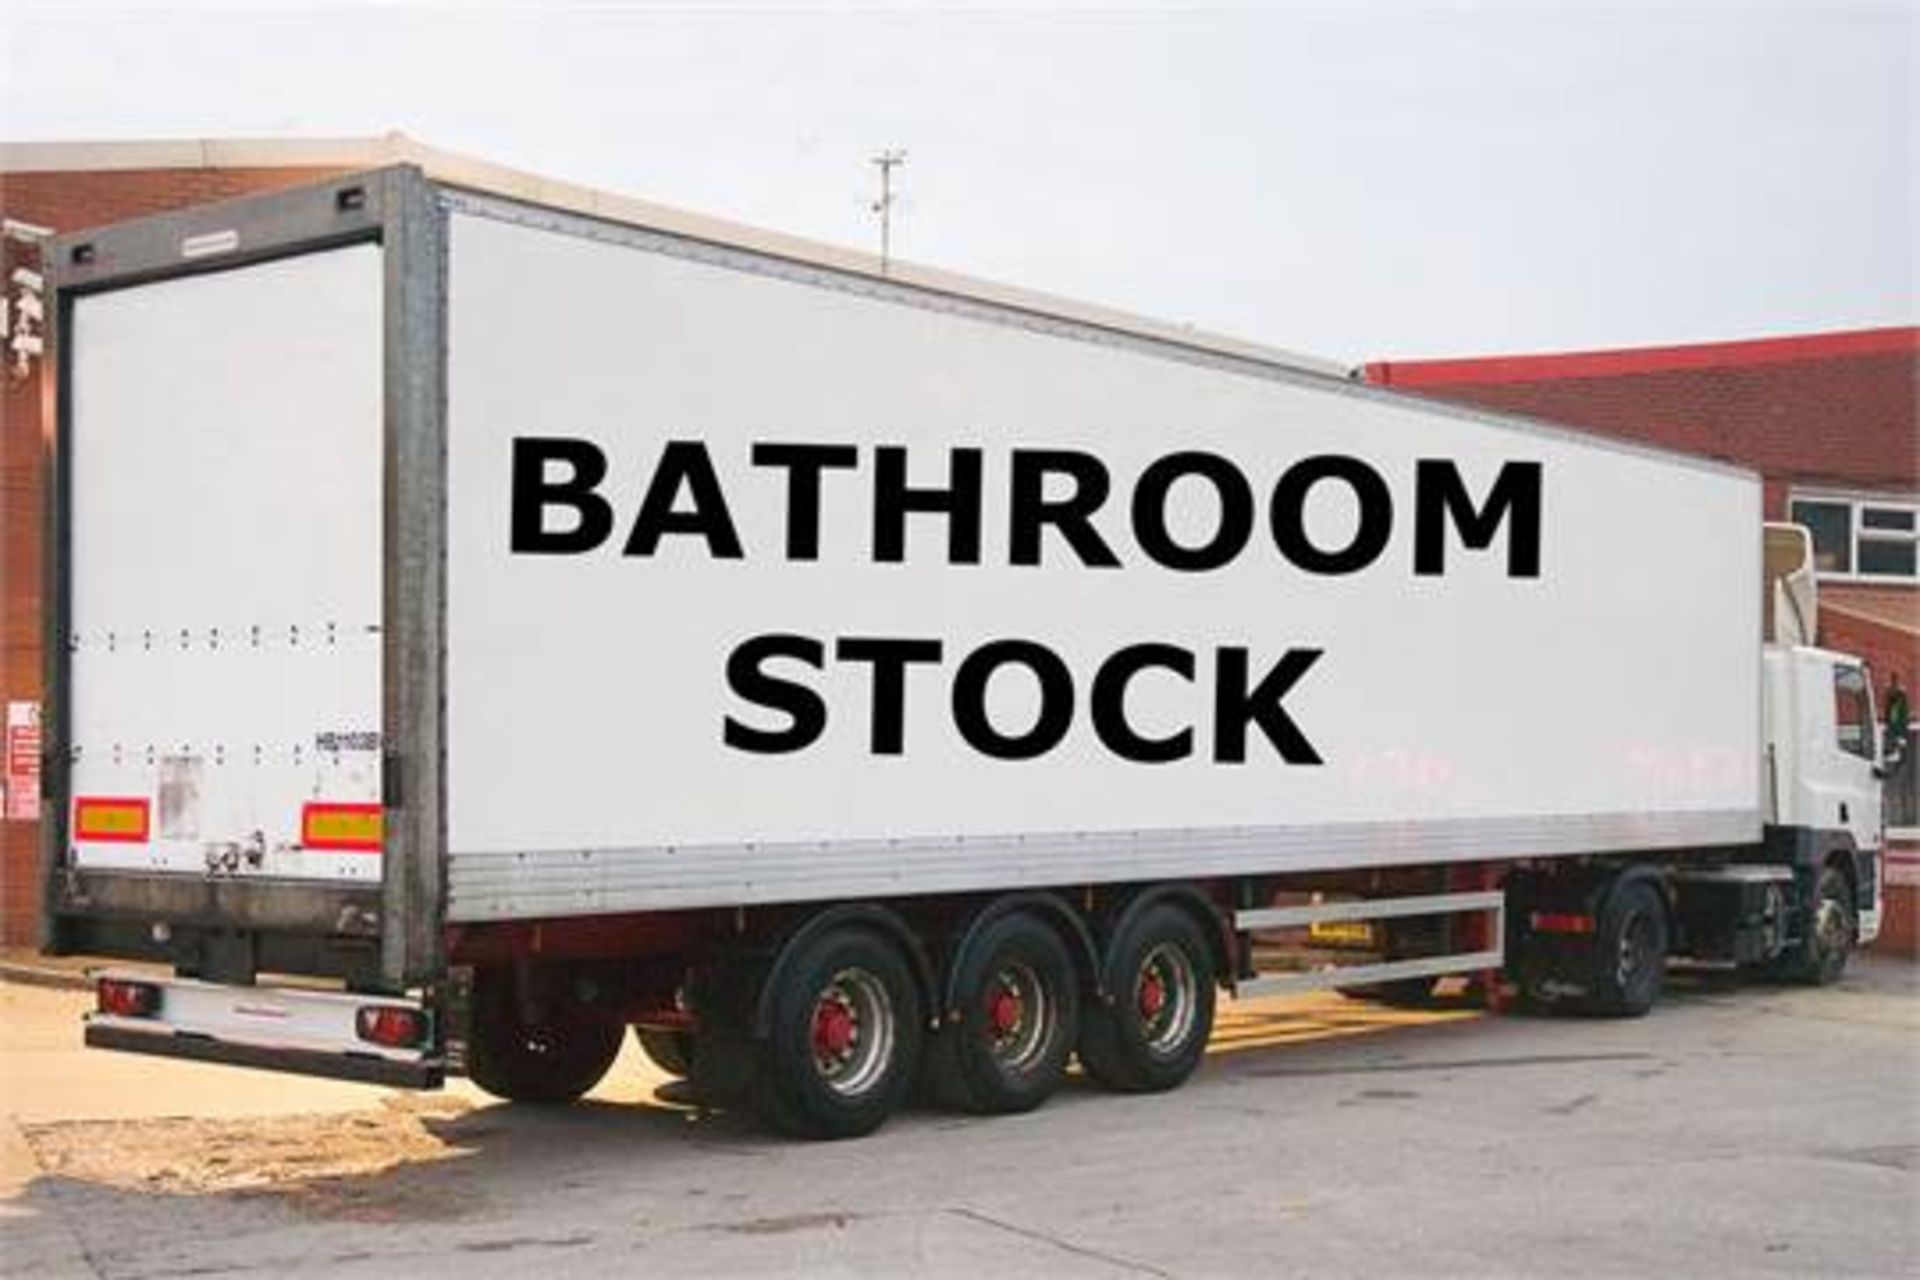 19 x Wholesale Pallets of Assorted Bathroom Stock - Contents of 40ft Trailer - From Well Known